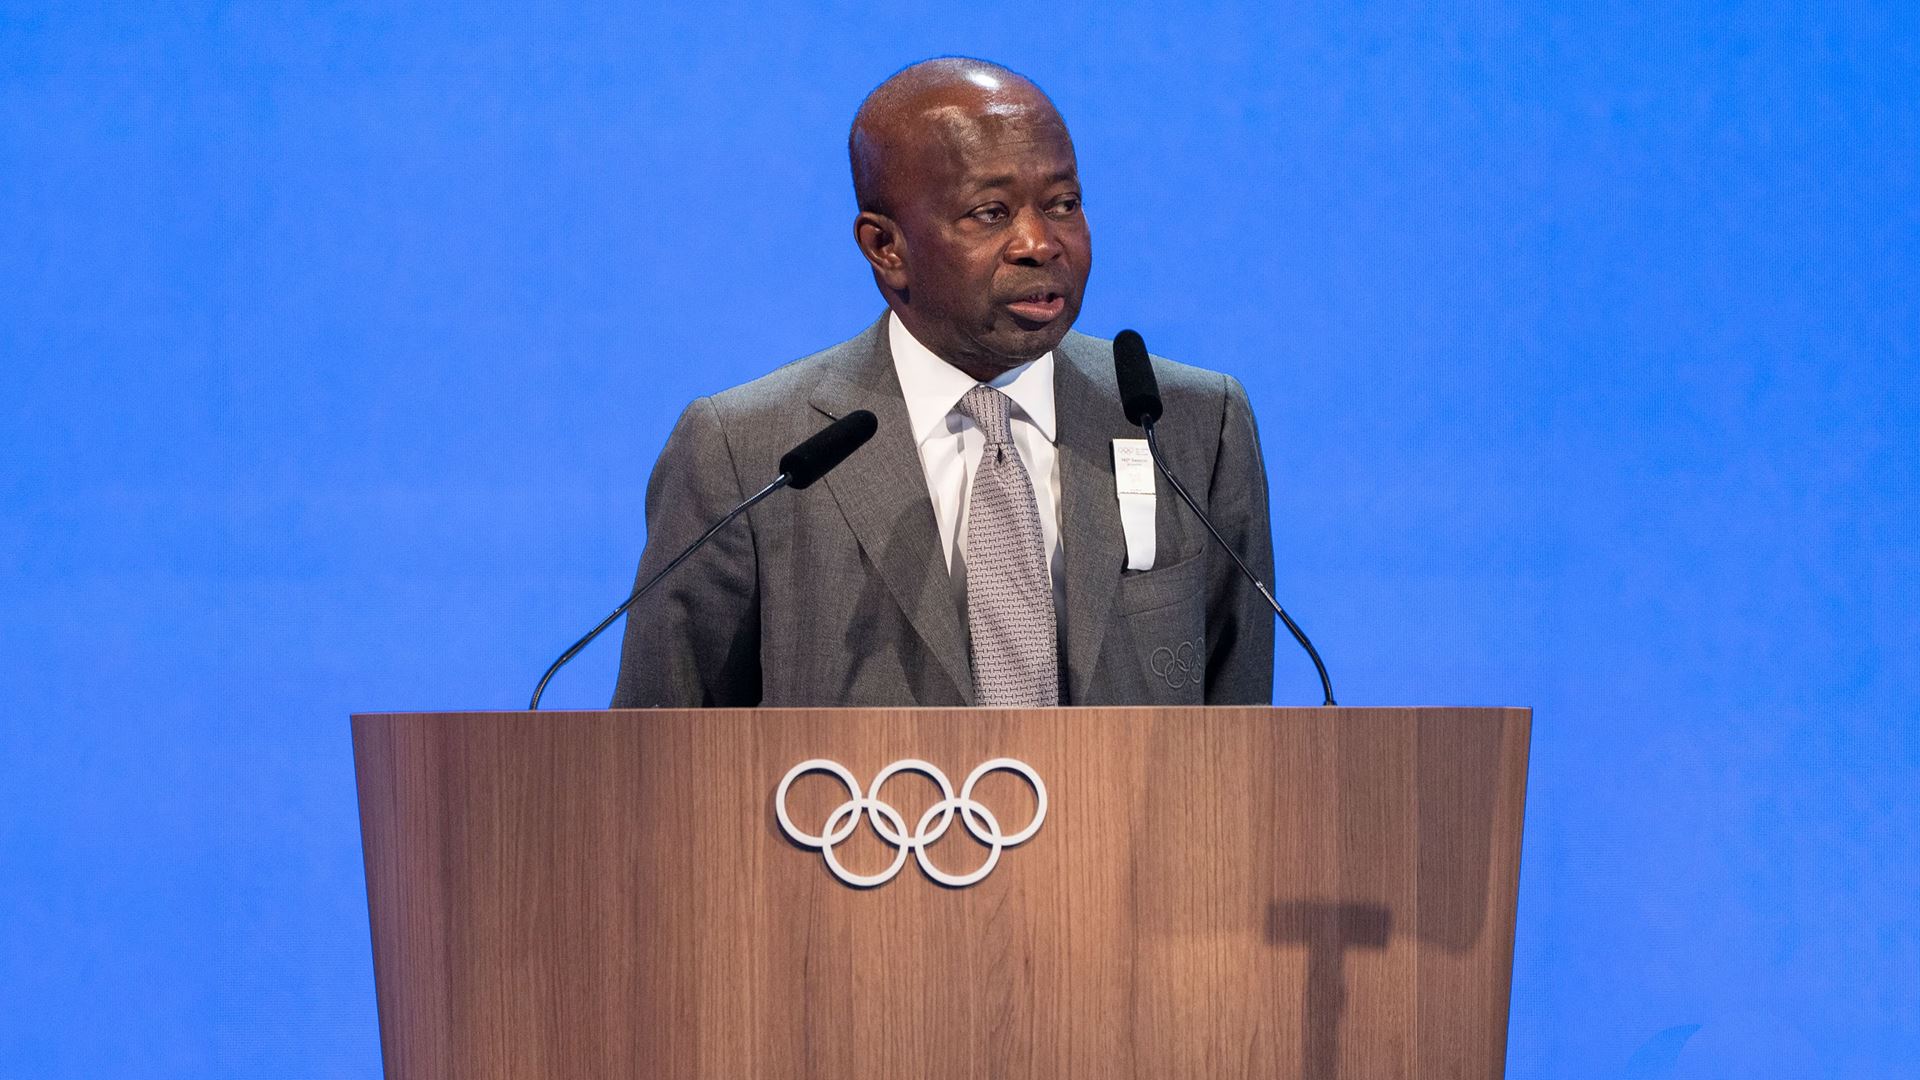 141st IOC Session hears updates on Youth Olympic Games Dakar 2026